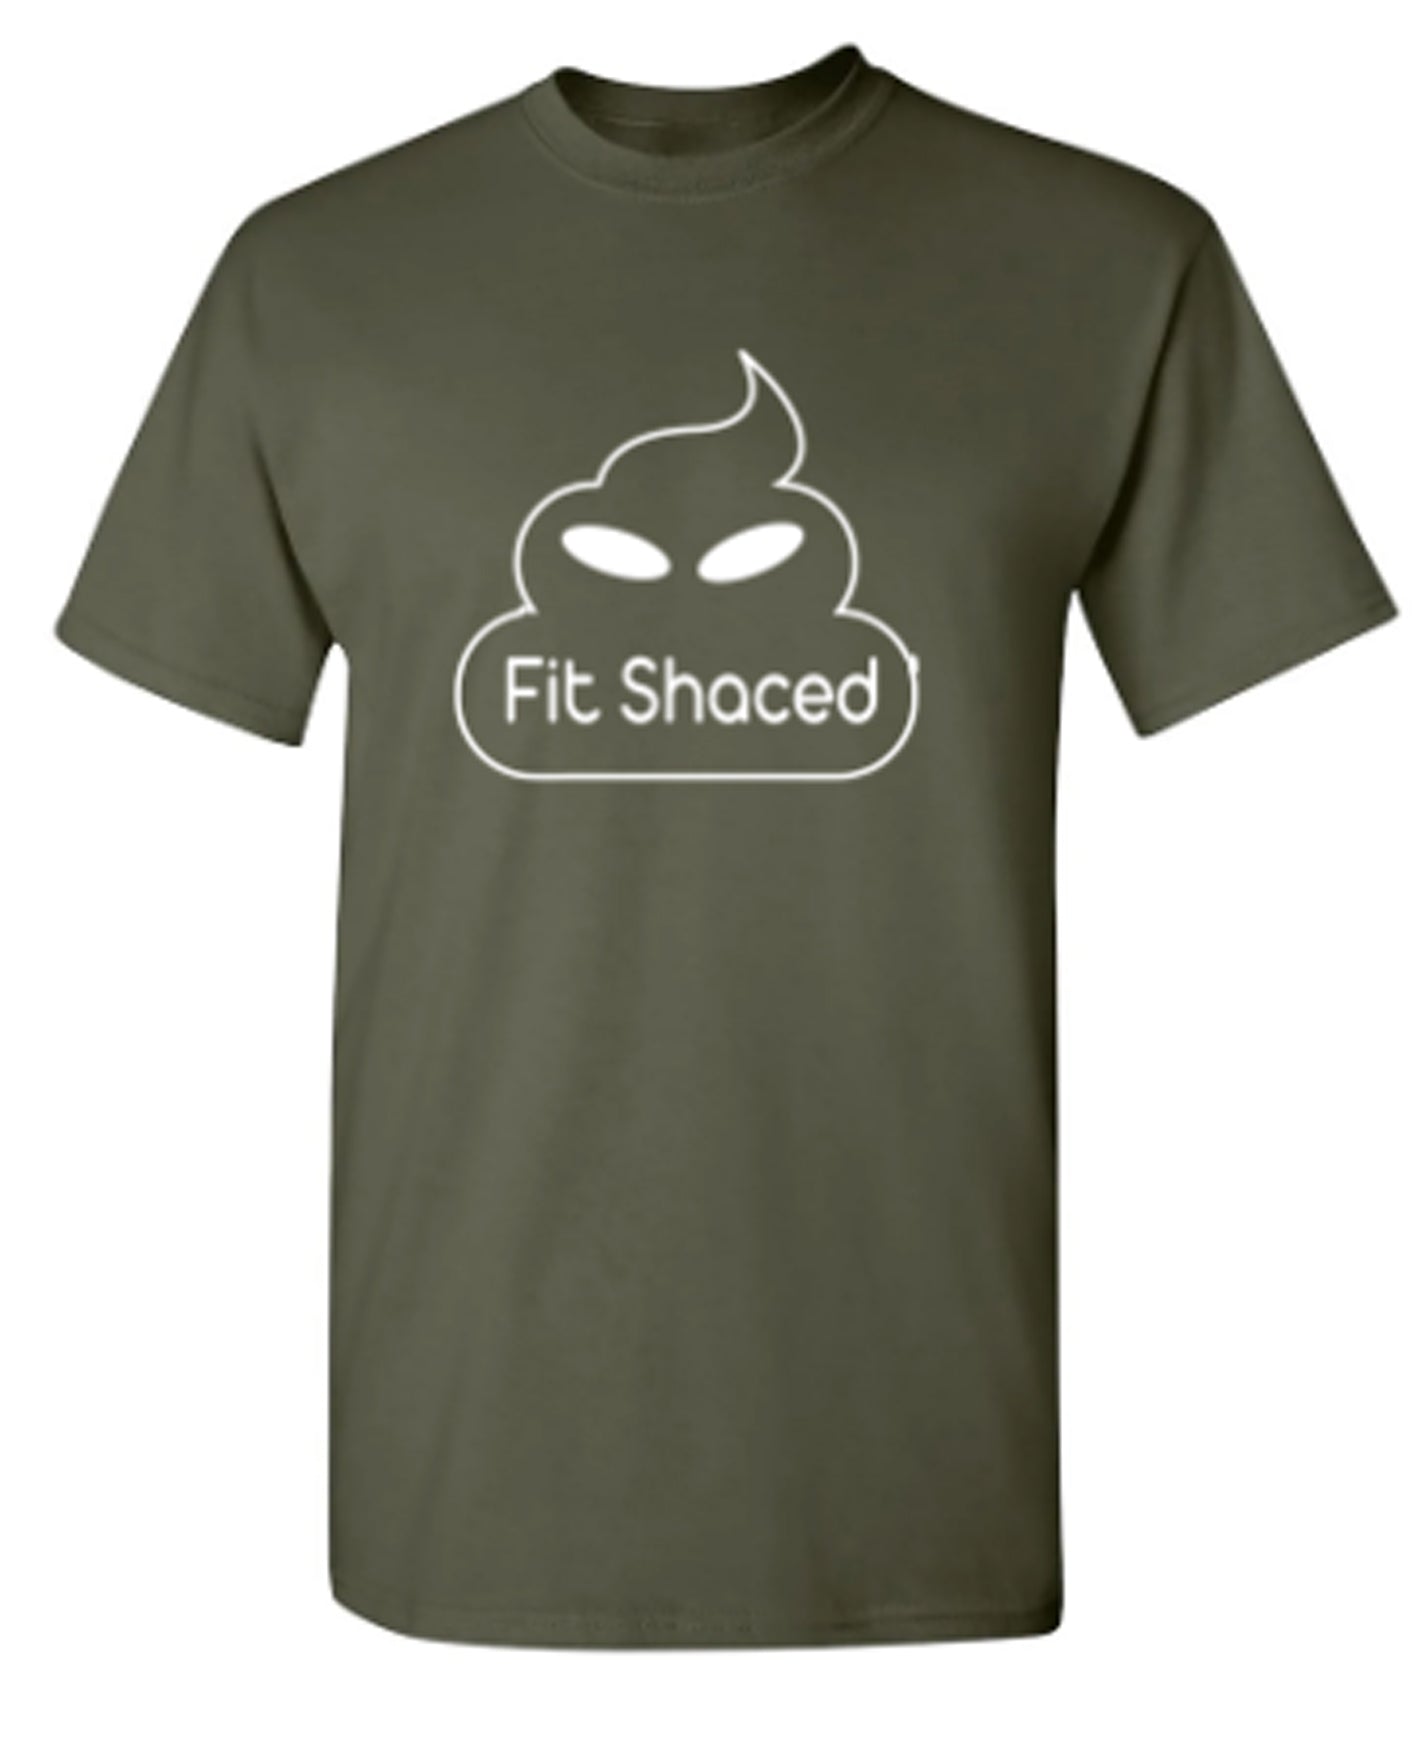 Fit Shaced - Funny T Shirts & Graphic Tees